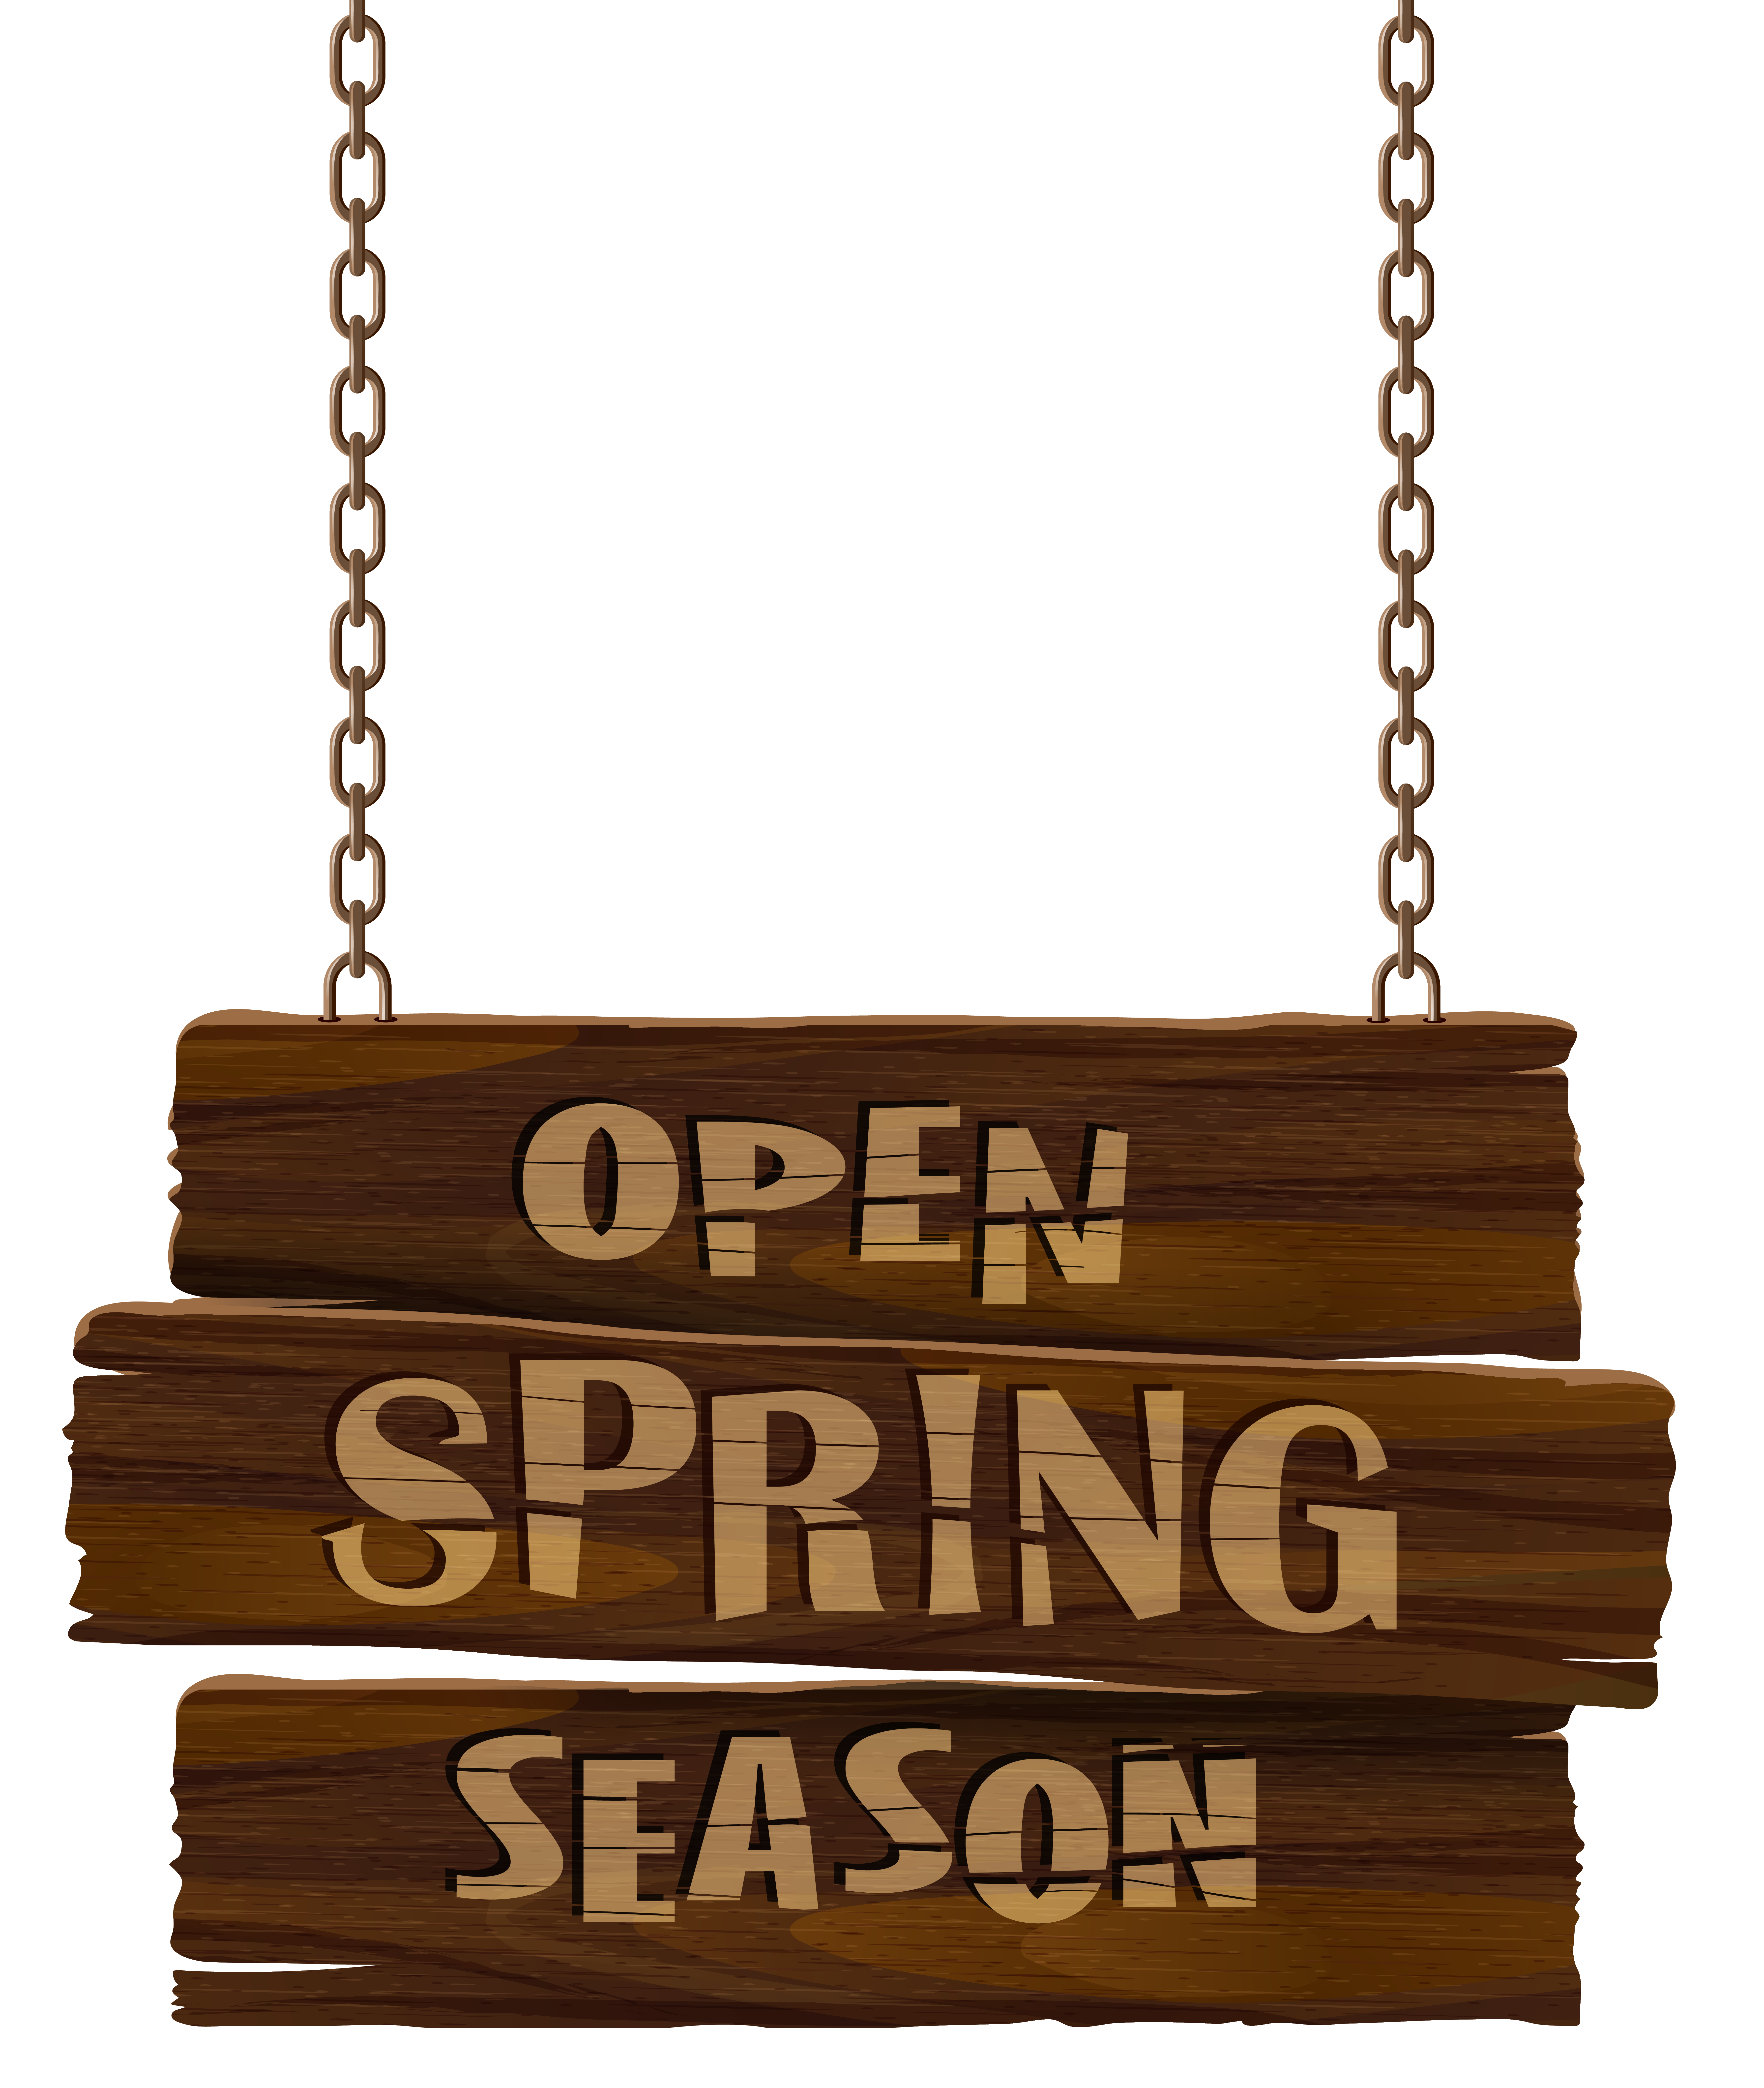 Clipart spring spring season. Open sign transparent png